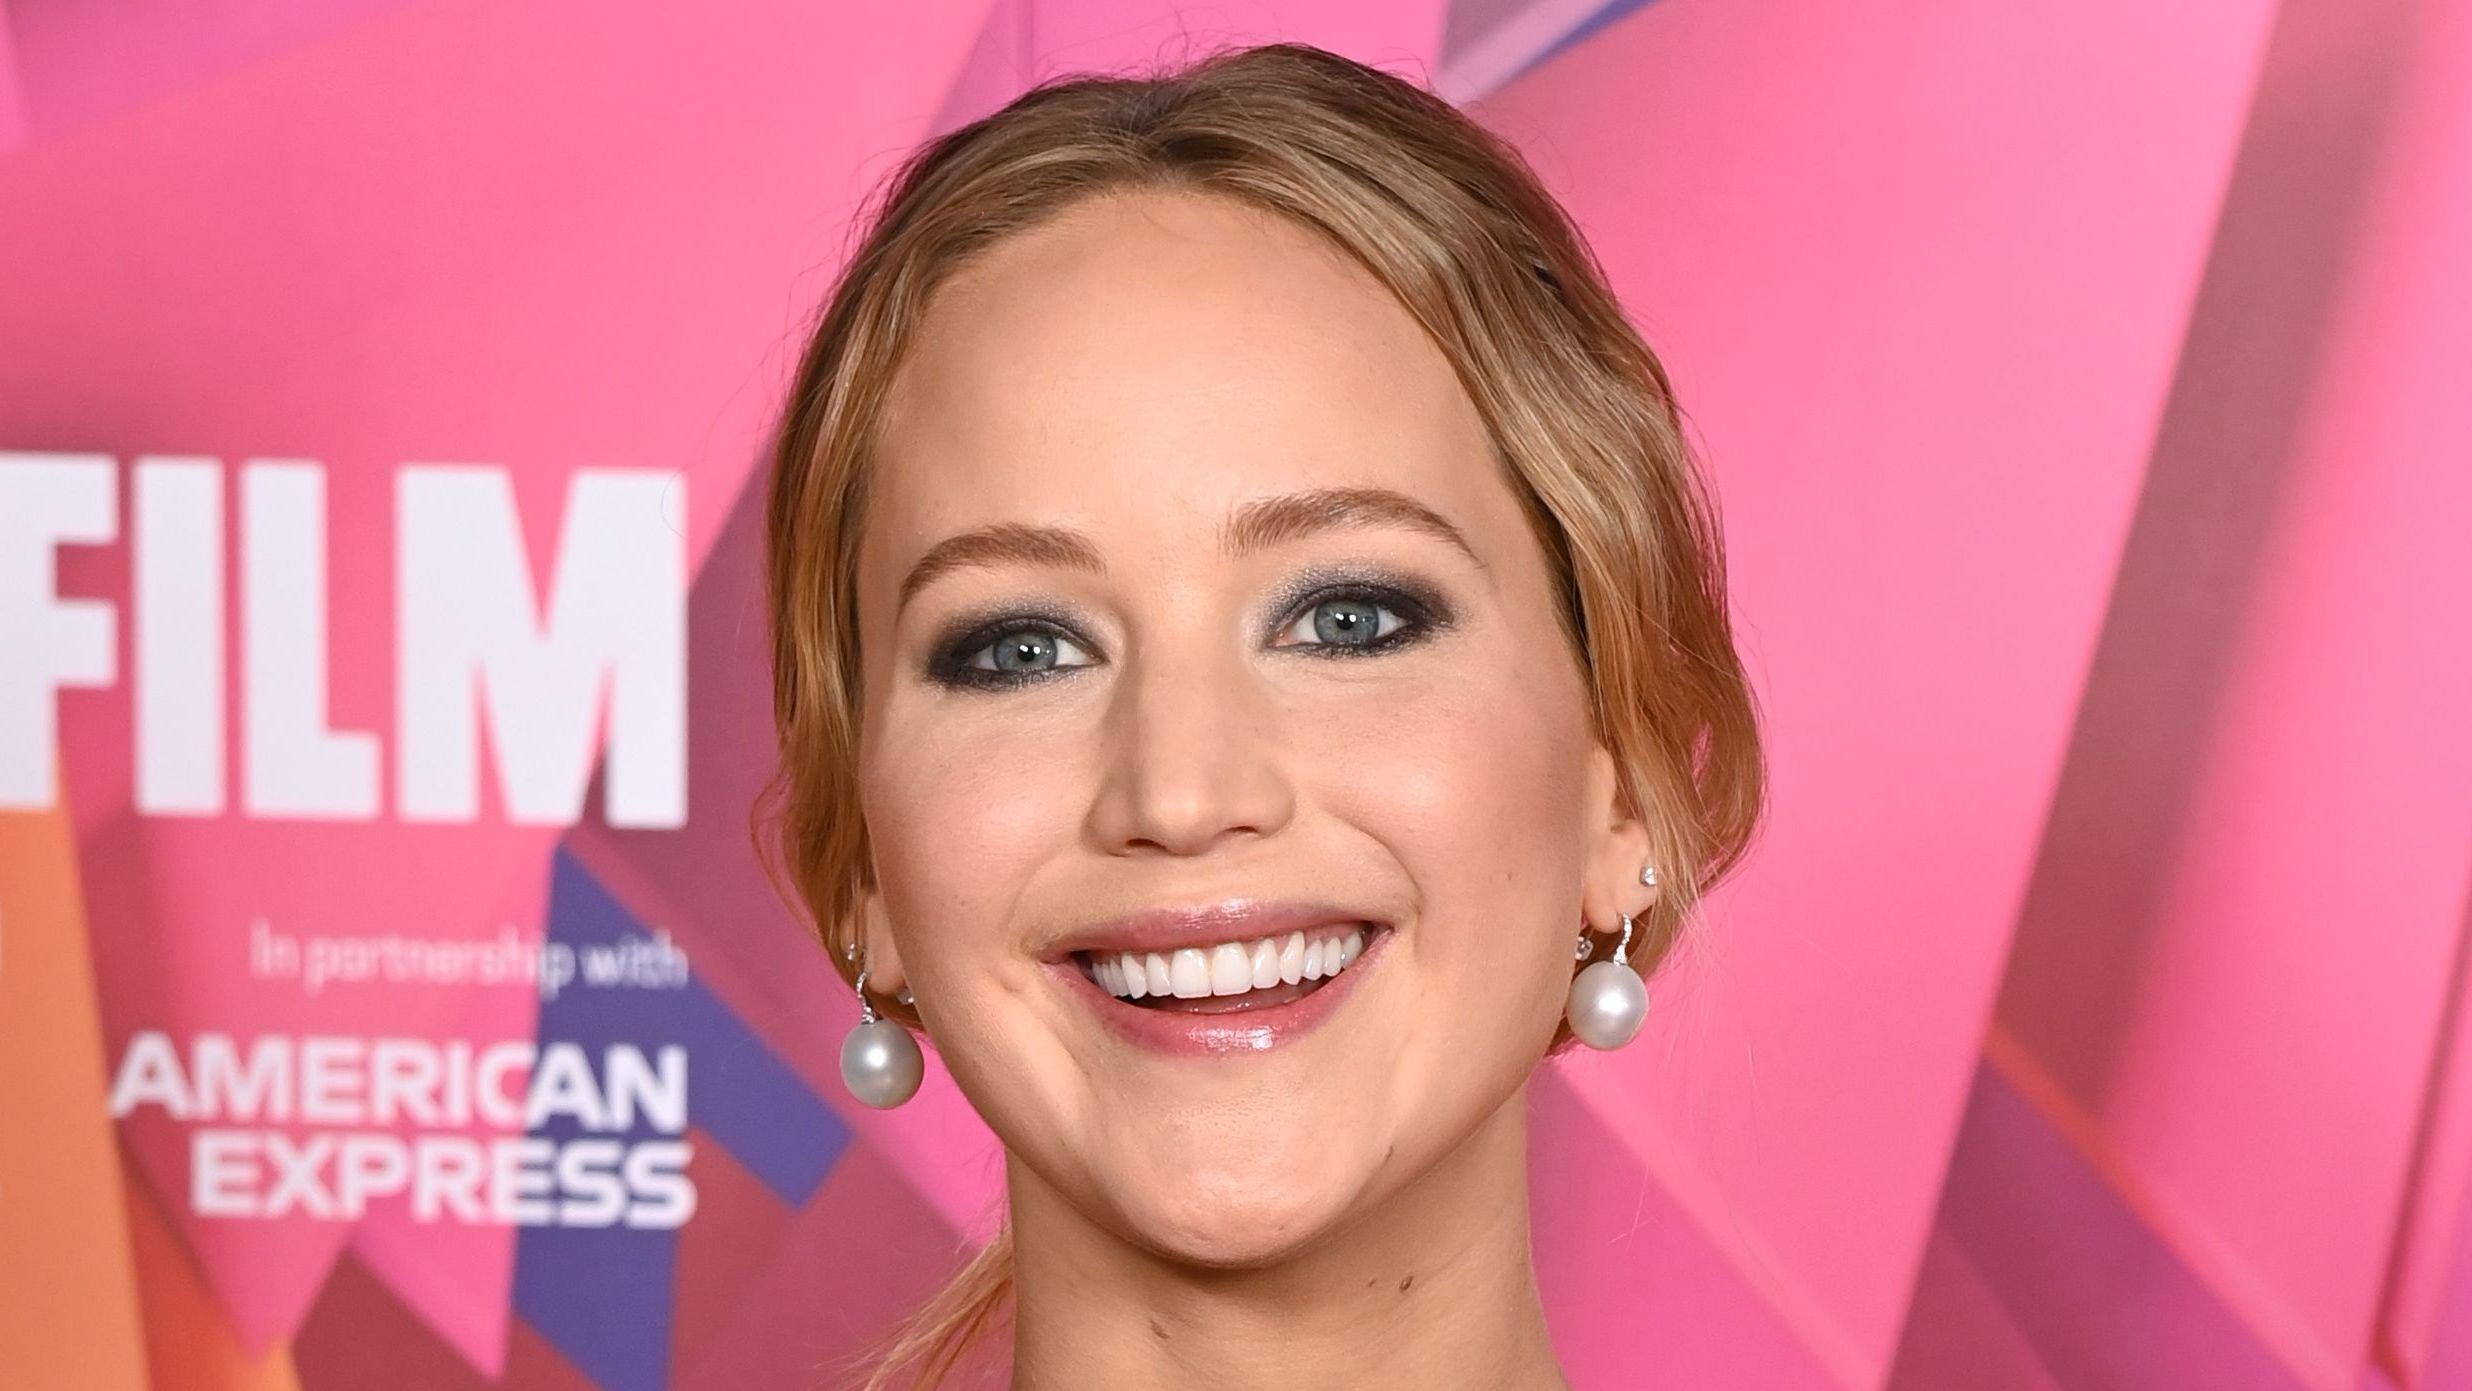 Jennifer Lawrence in black top with white beads and large pearl earrings at an event.